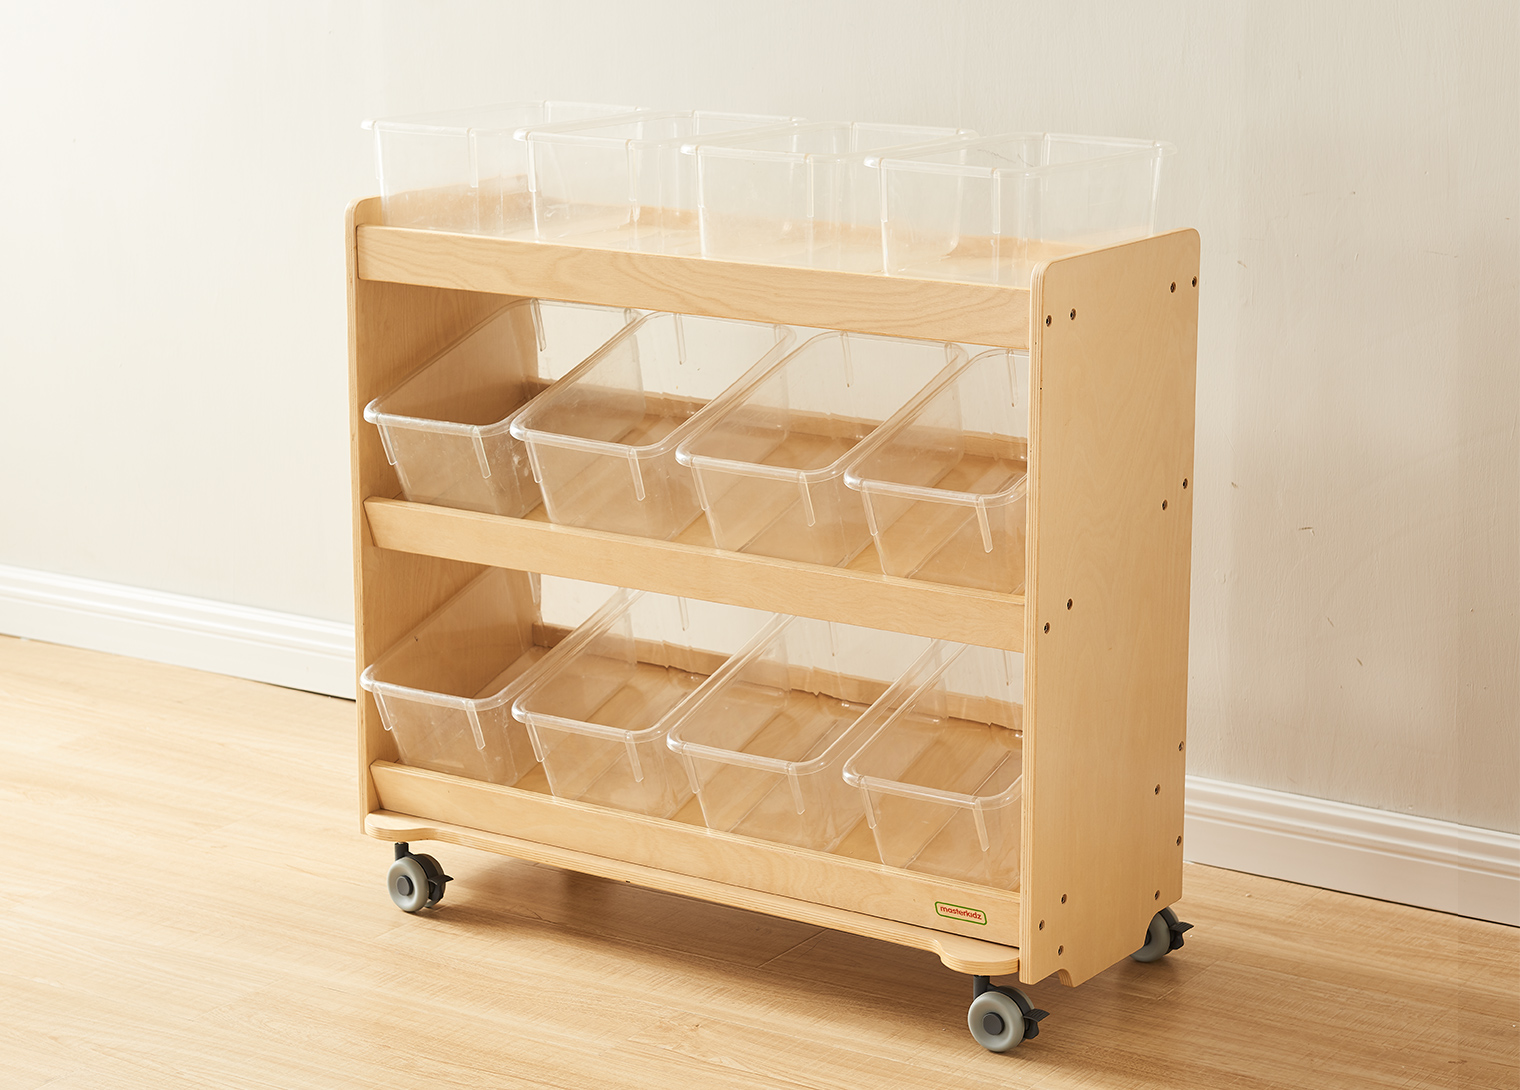 800H x 880L Mobile Shelving Unit (Trays Not Included)